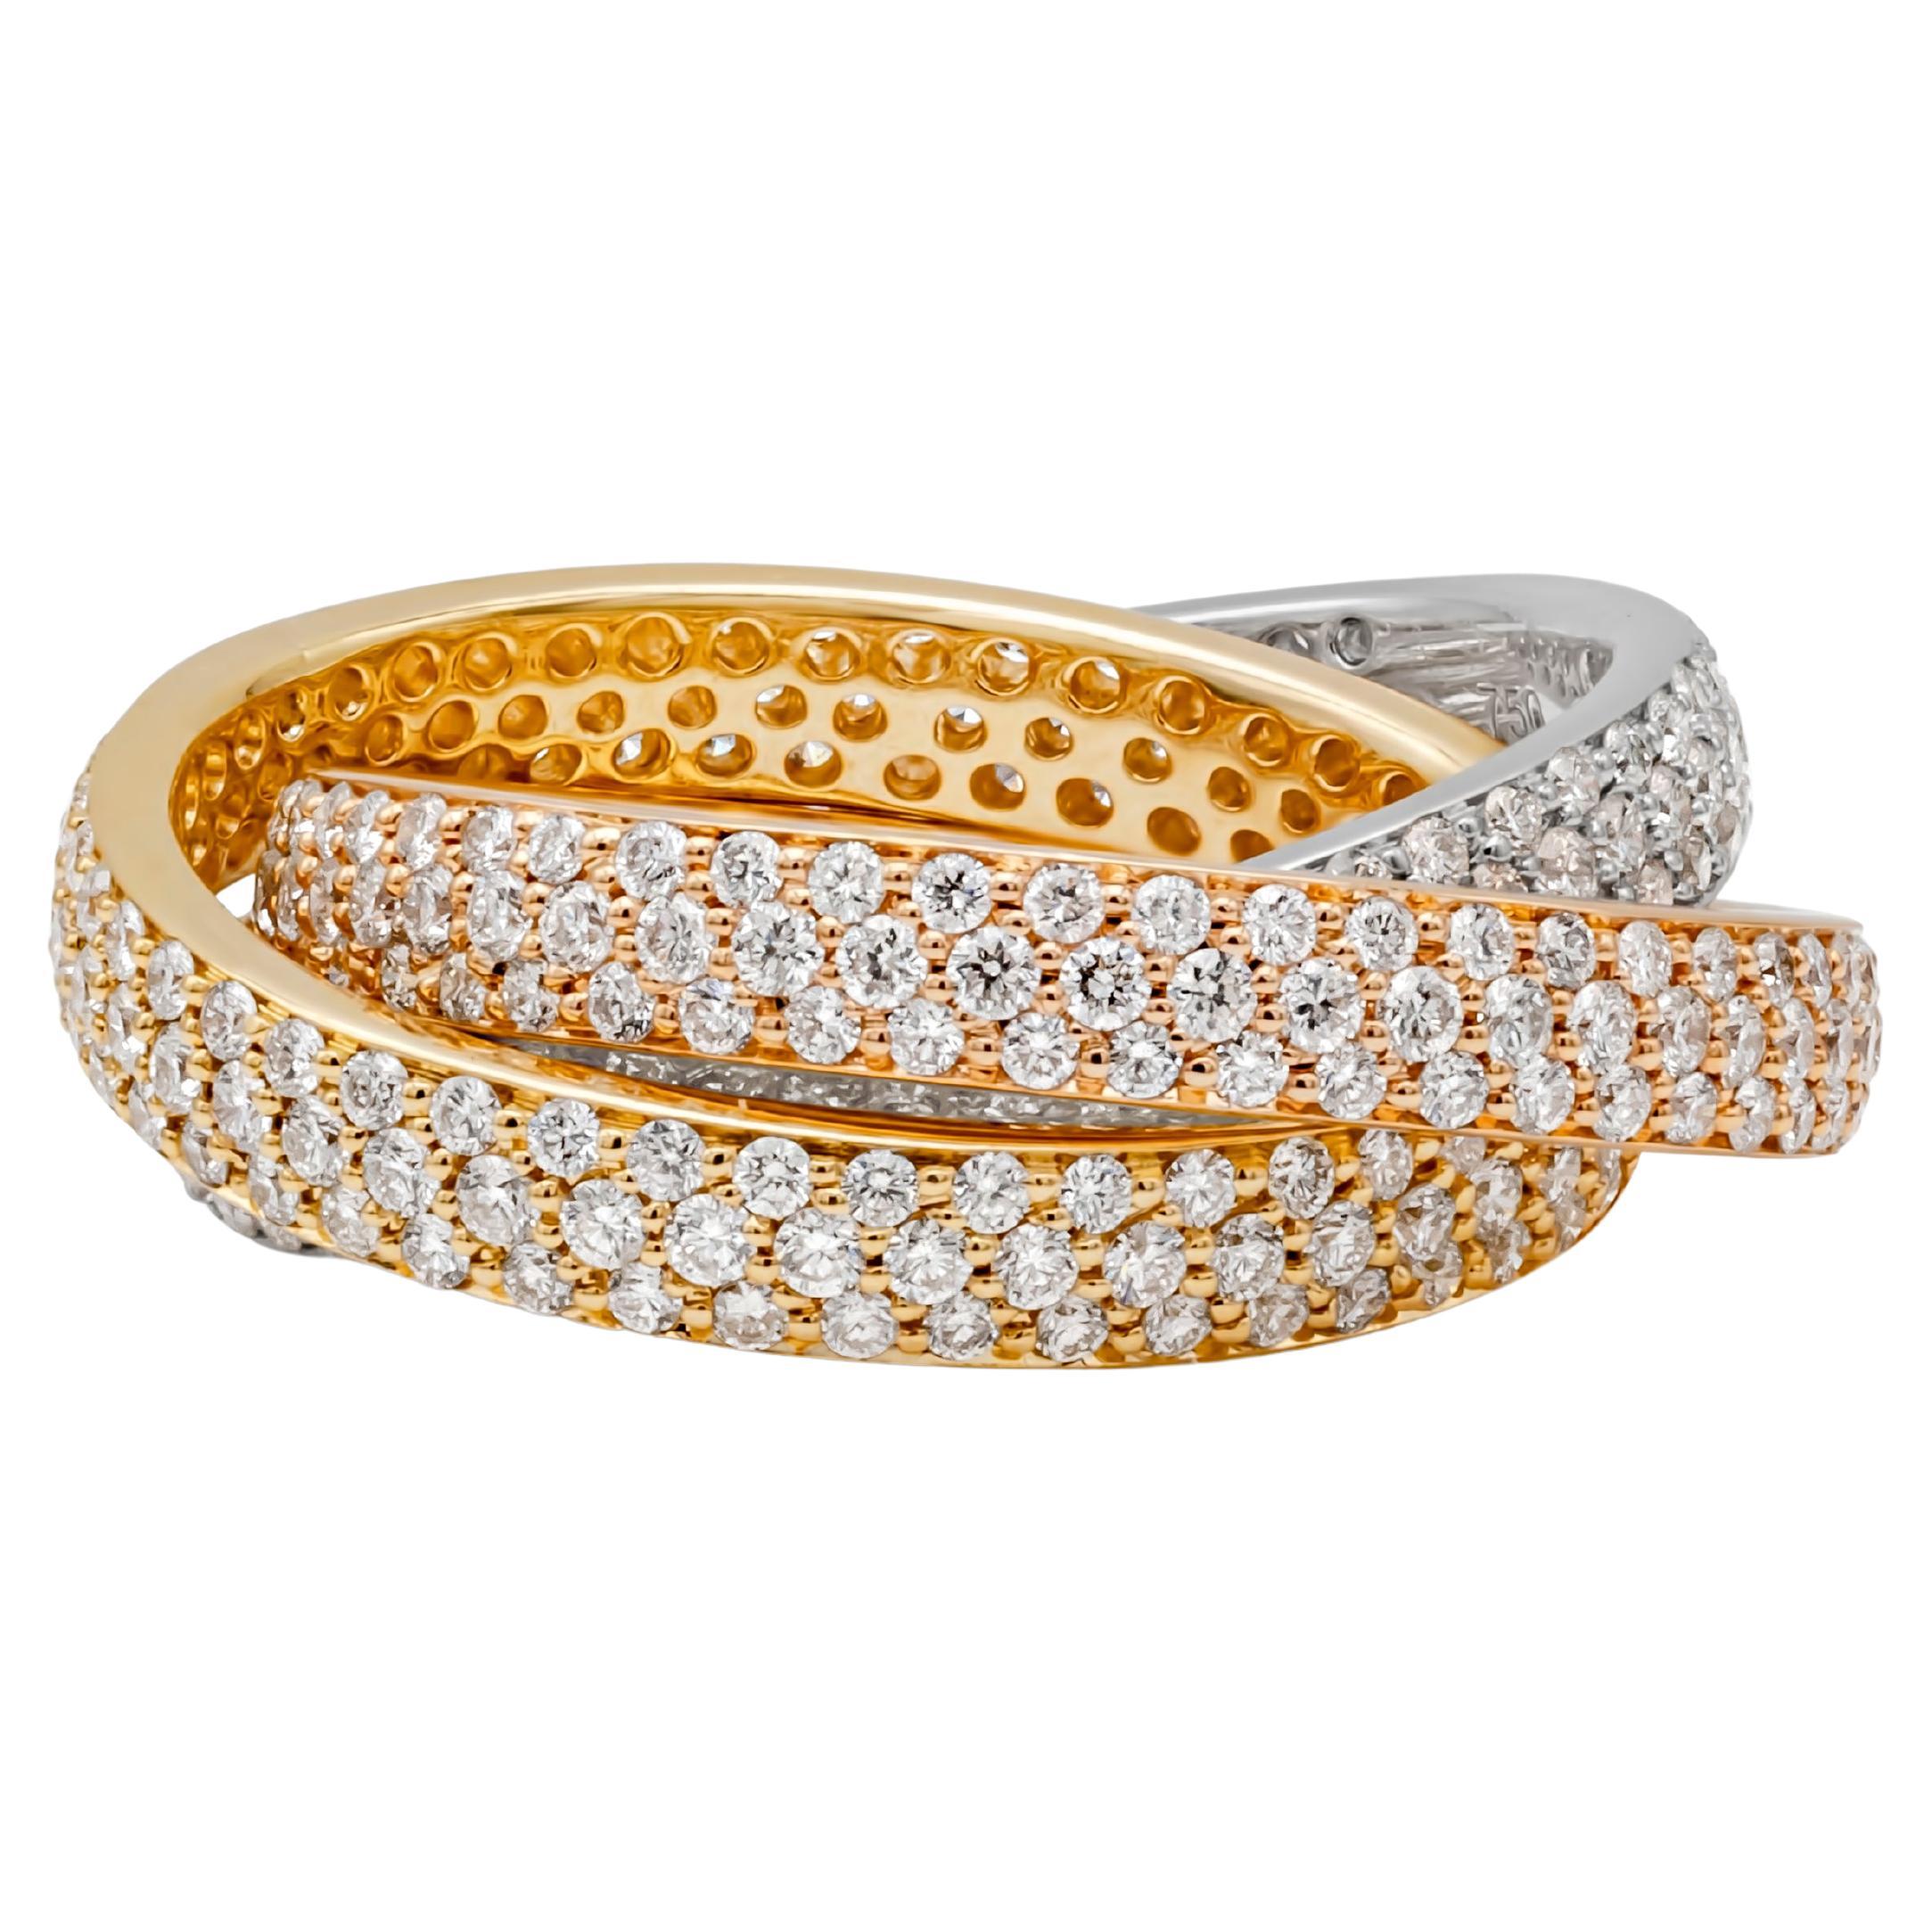 This gorgeous and stunning infinity rolling fashion ring features 18k white gold, yellow gold and rose gold pave eternity bands interlocked and accented with 414 brilliant round cut diamonds weighing 3.10 carats total, F-G color and VS-SI in